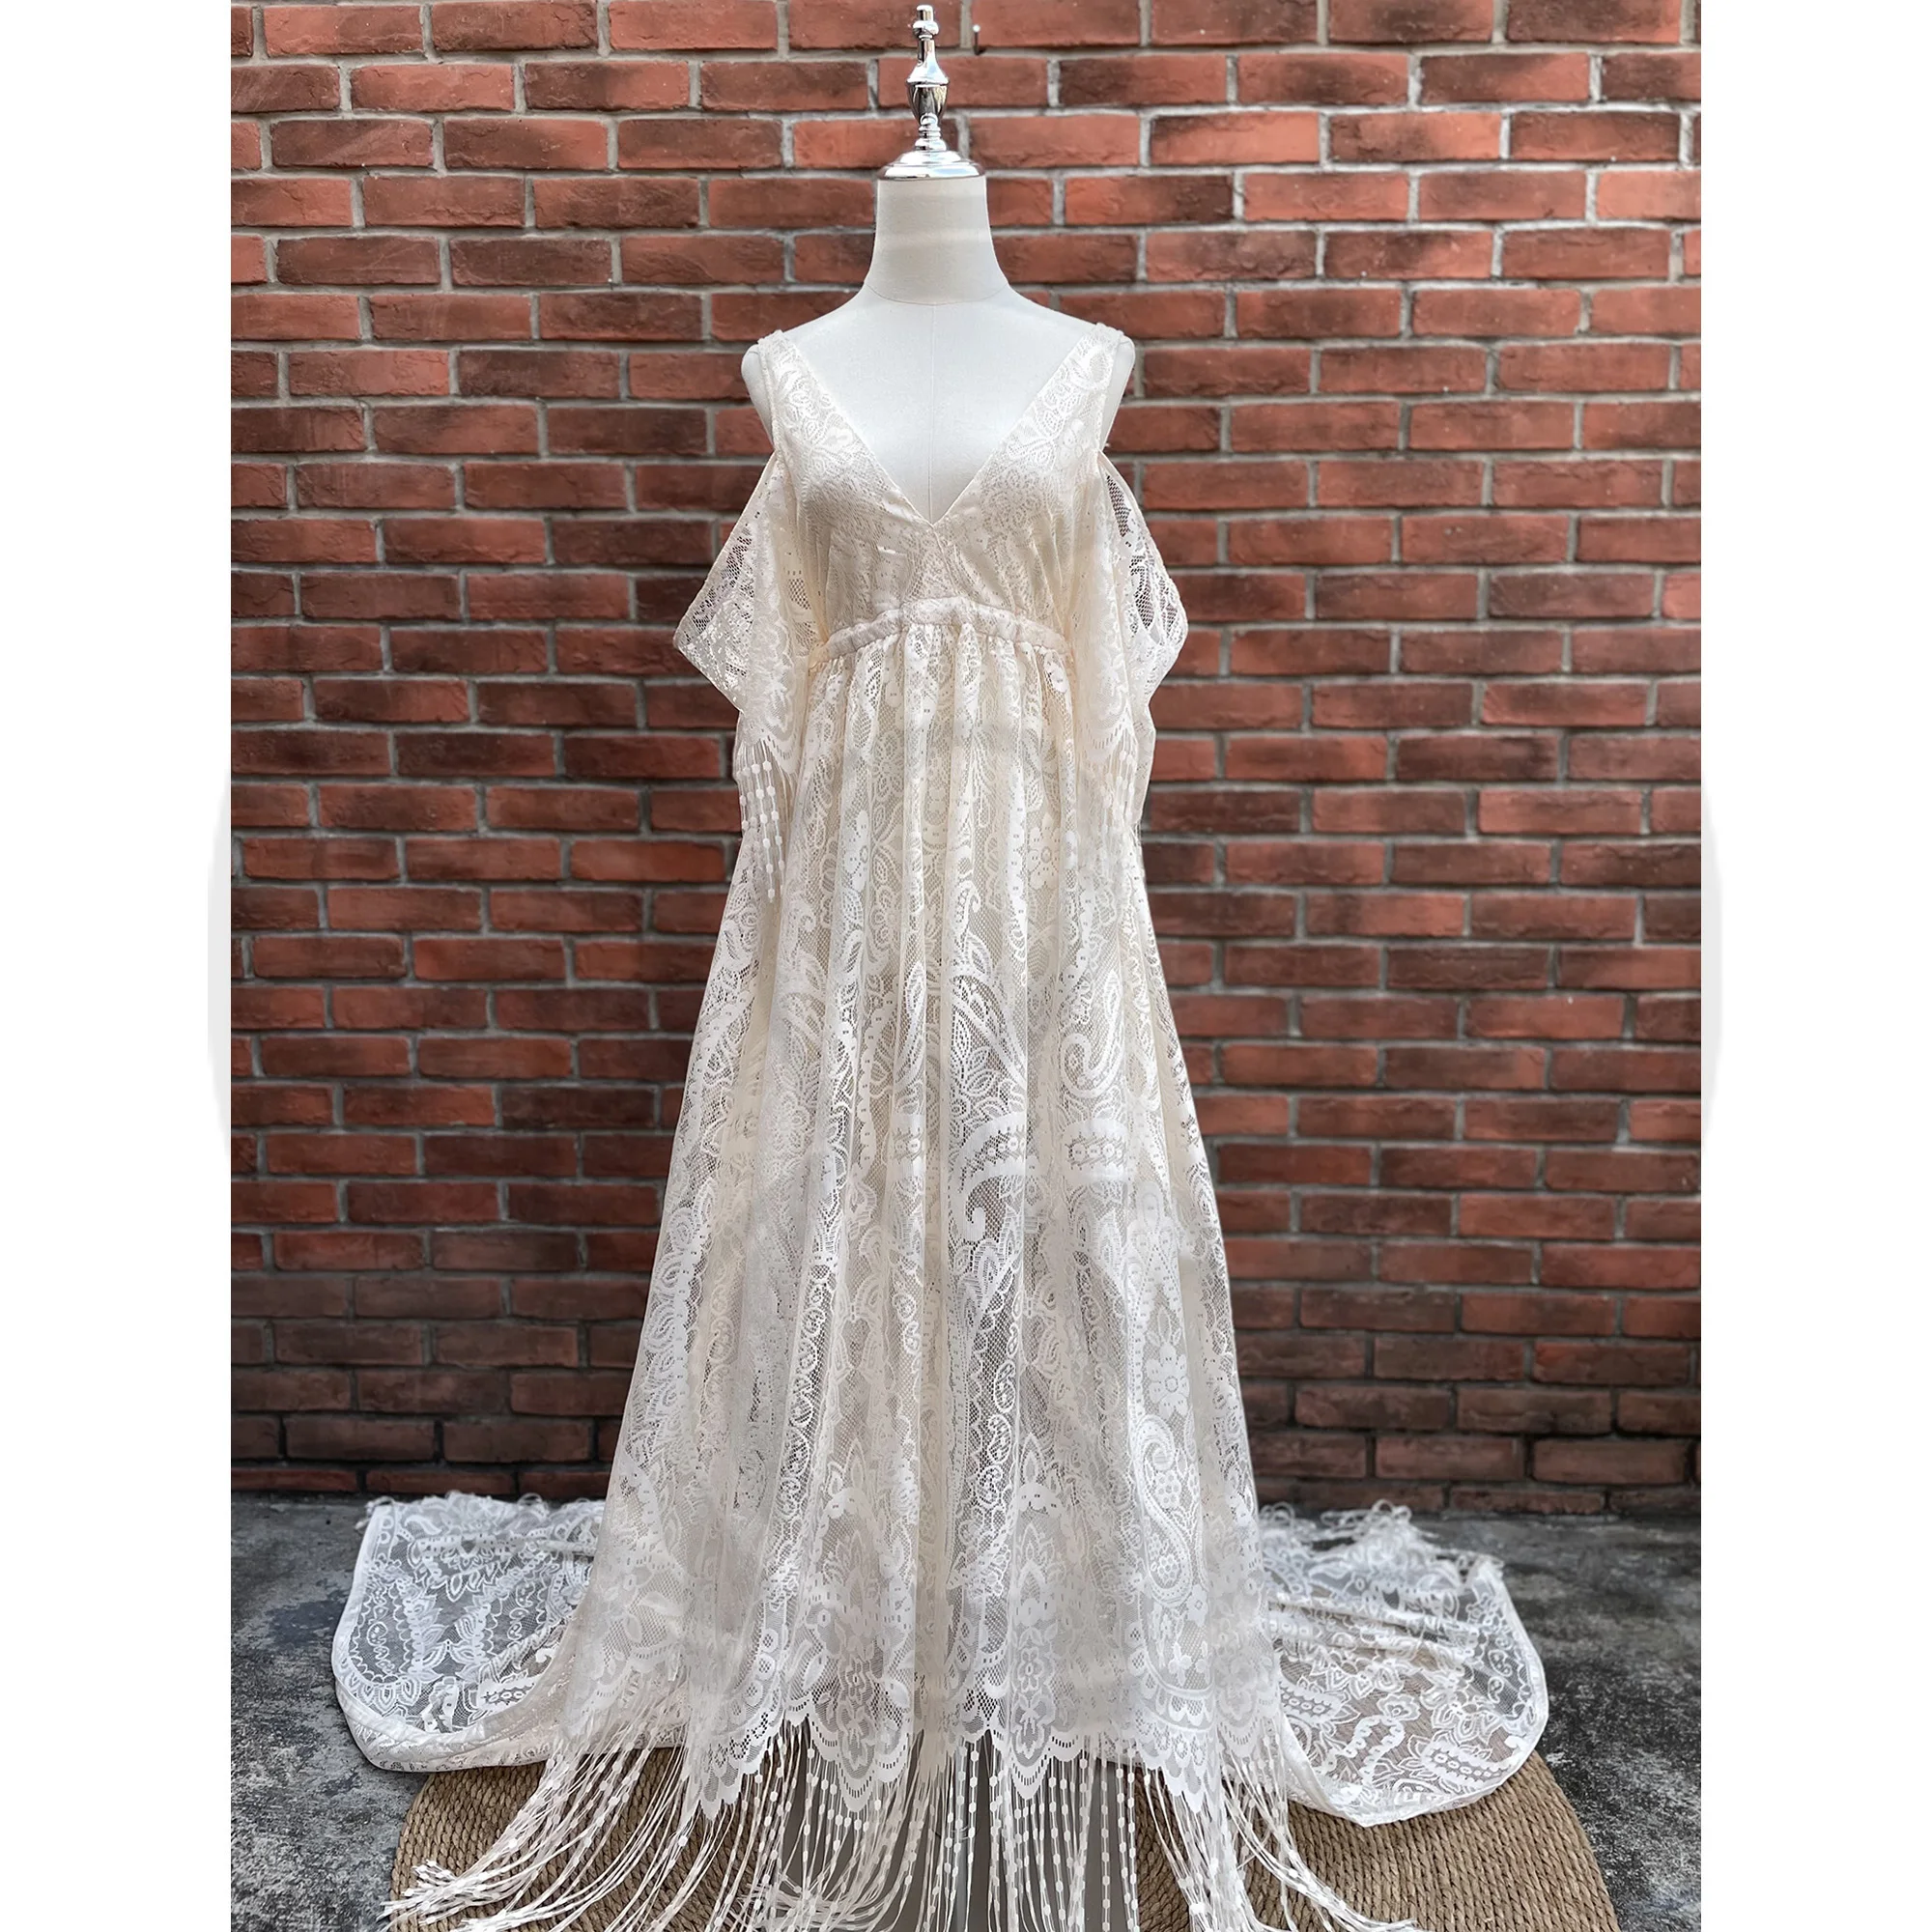 Don&Judy Drop Slip Lace Maternity Dresses for Photo Shoot Pregnant Woman Photography V-neck Gown Baby Shower Clothing Maxi Robe enlarge